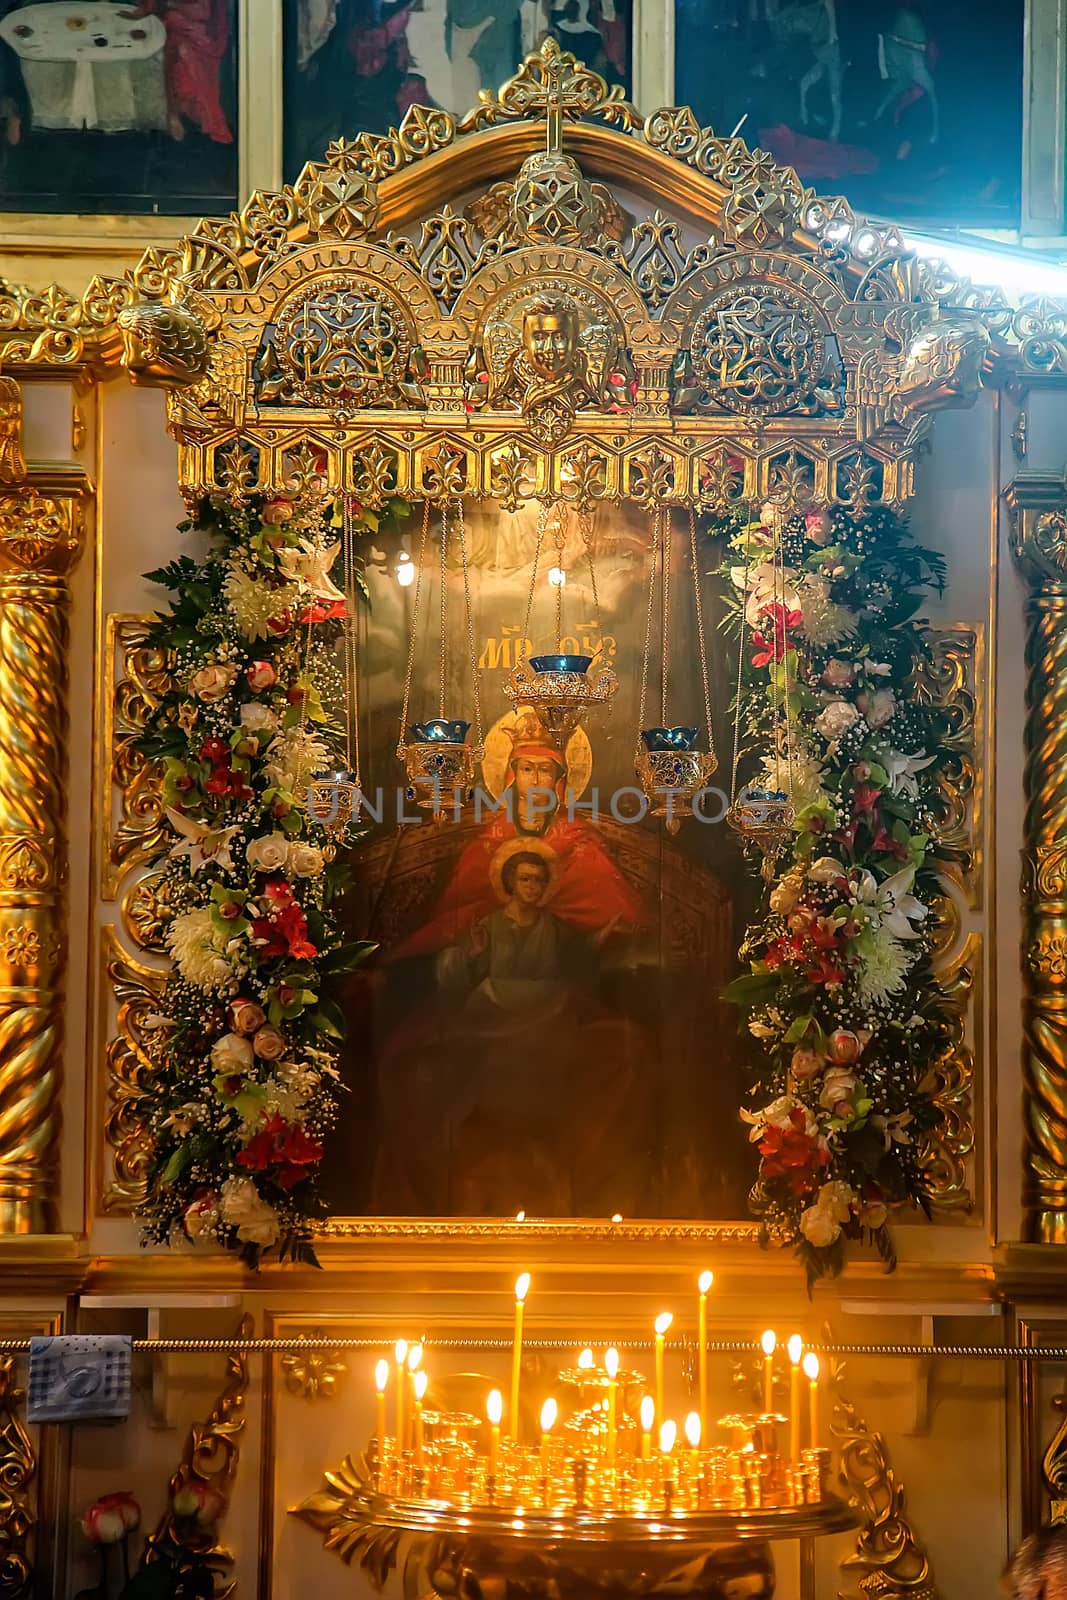 Our Lady Derzhavnaya, Sovereign, Reigning Icon is a Russian icon - remains one of the most revered both inside Russia and in Russian emigre circles. Kolomenskoye Sovereign Icon of the Mother of God